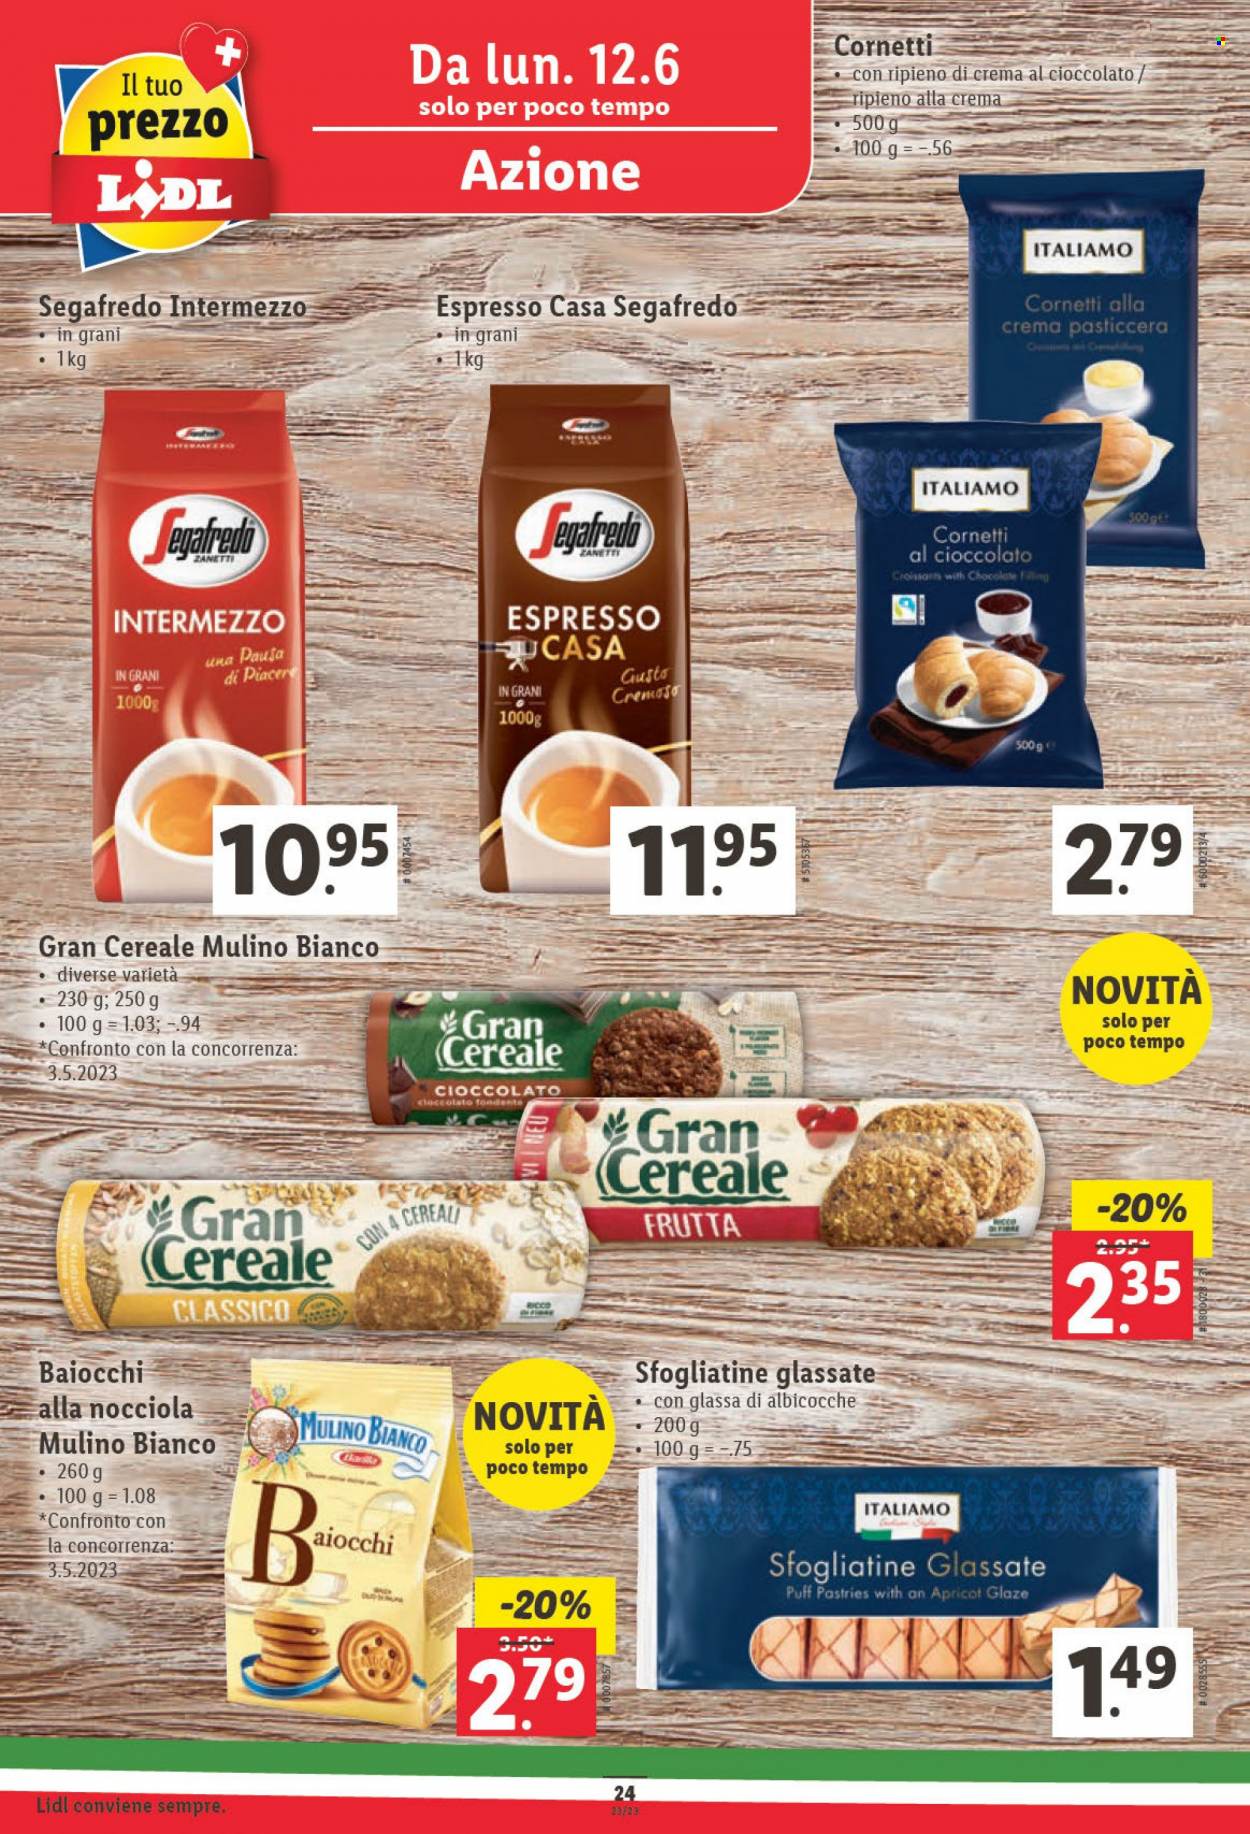 Catalogue Lidl - 8.6.2023 - 14.6.2023. Page 24.